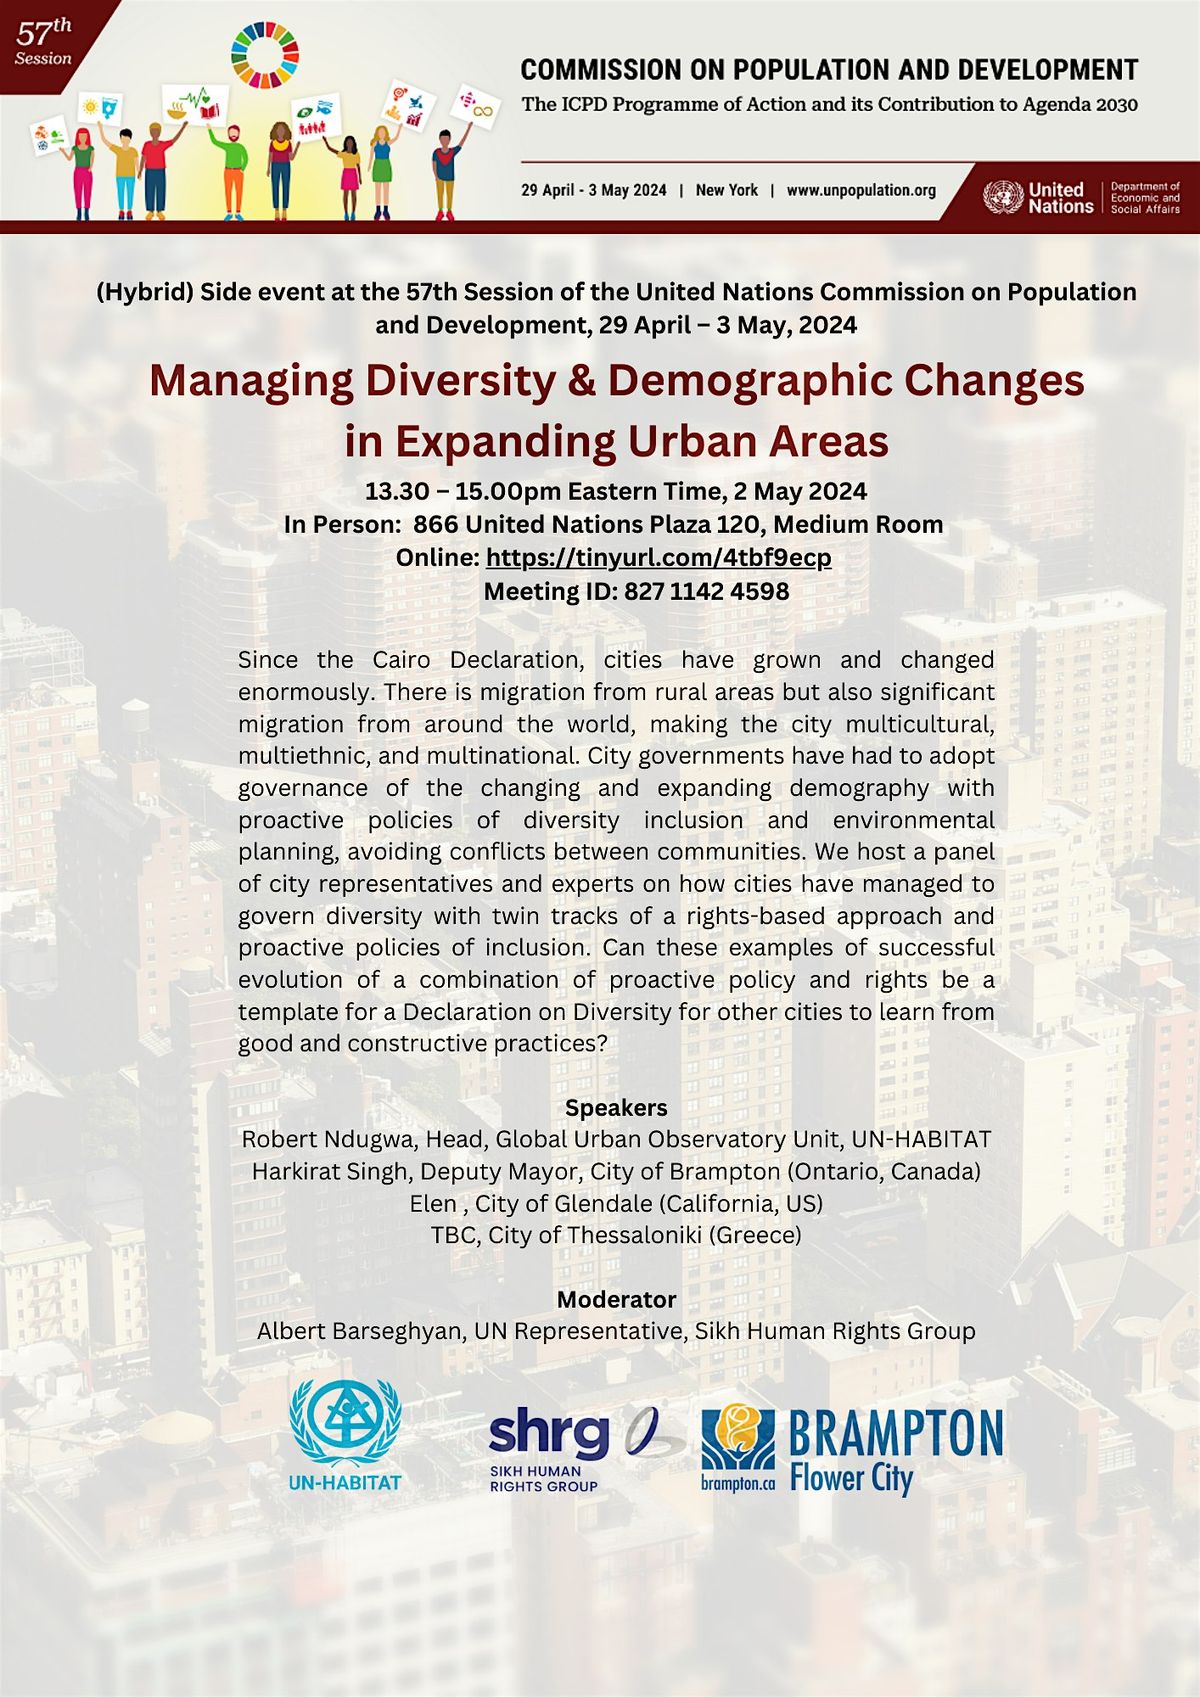 Managing Diversity & Demographic Changes in Expanding Urban Areas